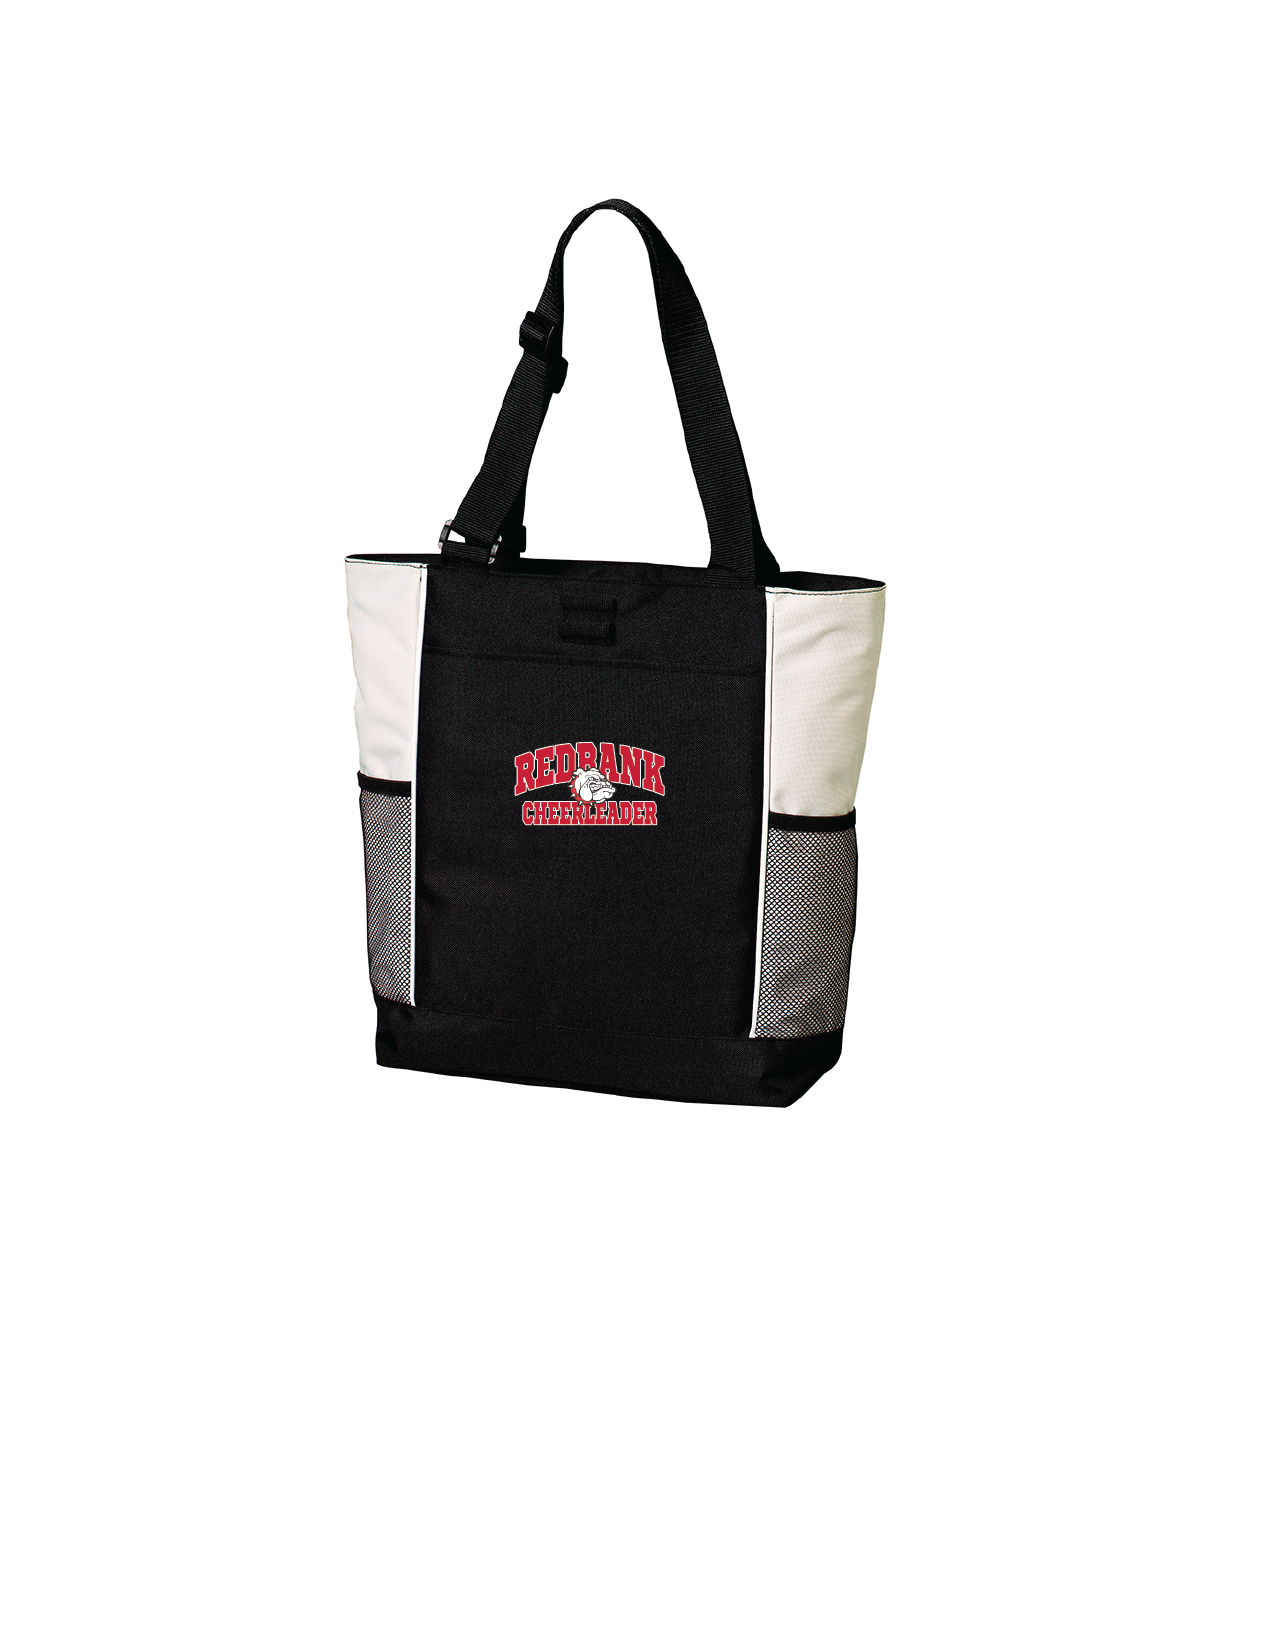 RV CHEER EMBROIDERED TOTE BAG